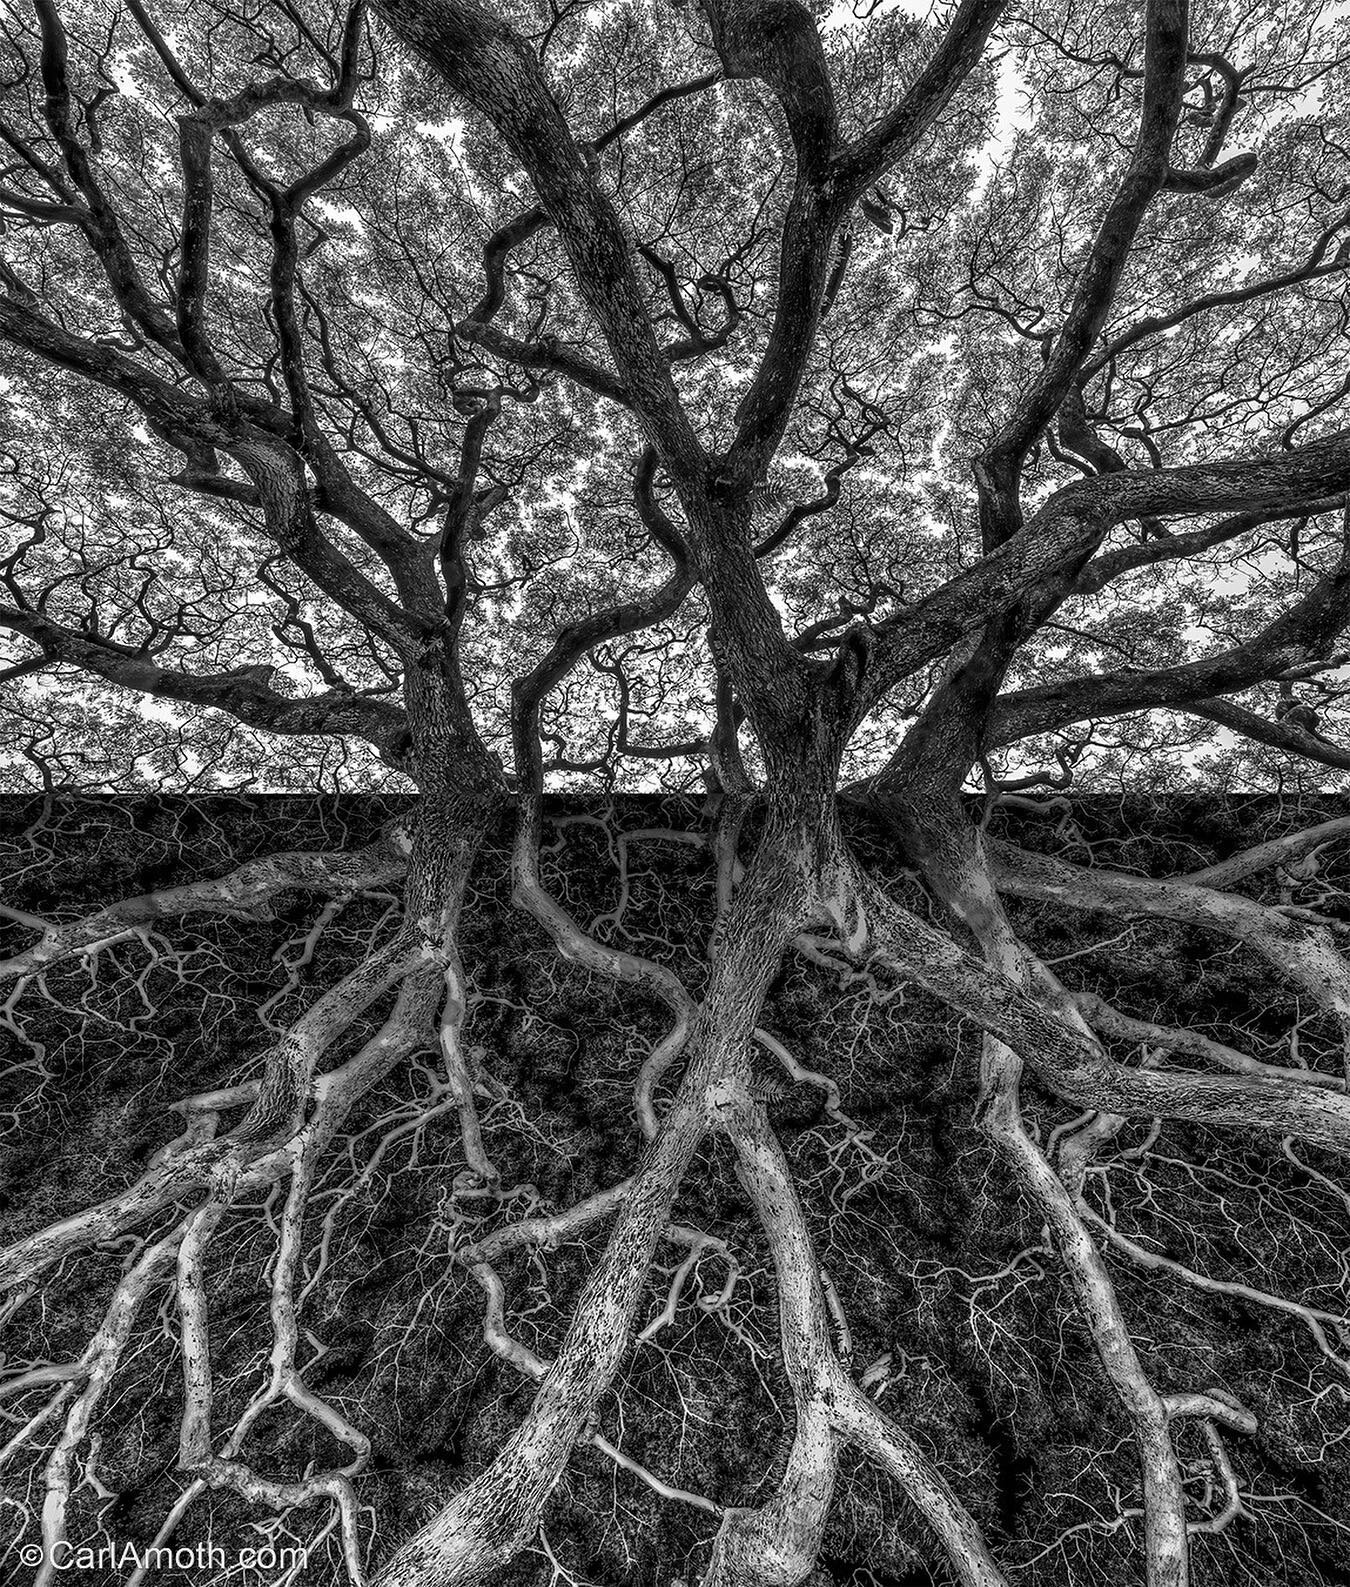 Deep Roots ~

Photographic artwork created from a single photo of the canopy of a massive monkey pod tree in Hawaii.

#photoartwork #abstractart #blackandwhite #bwphotography #tree #fineart #artwork #art